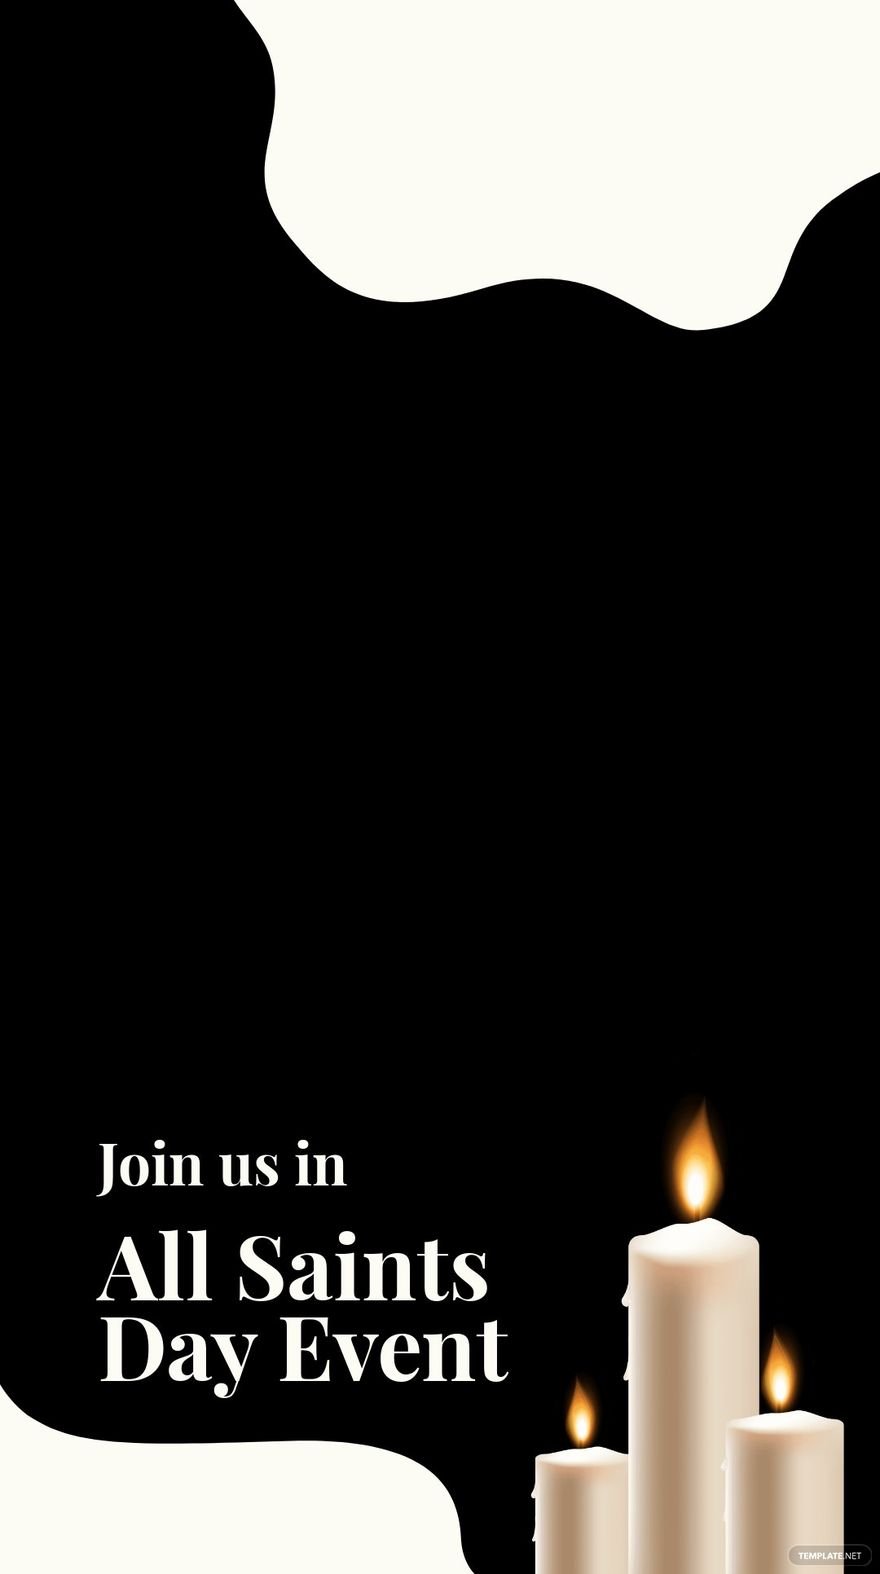 All Saints Day Event Snapchat Geofilter